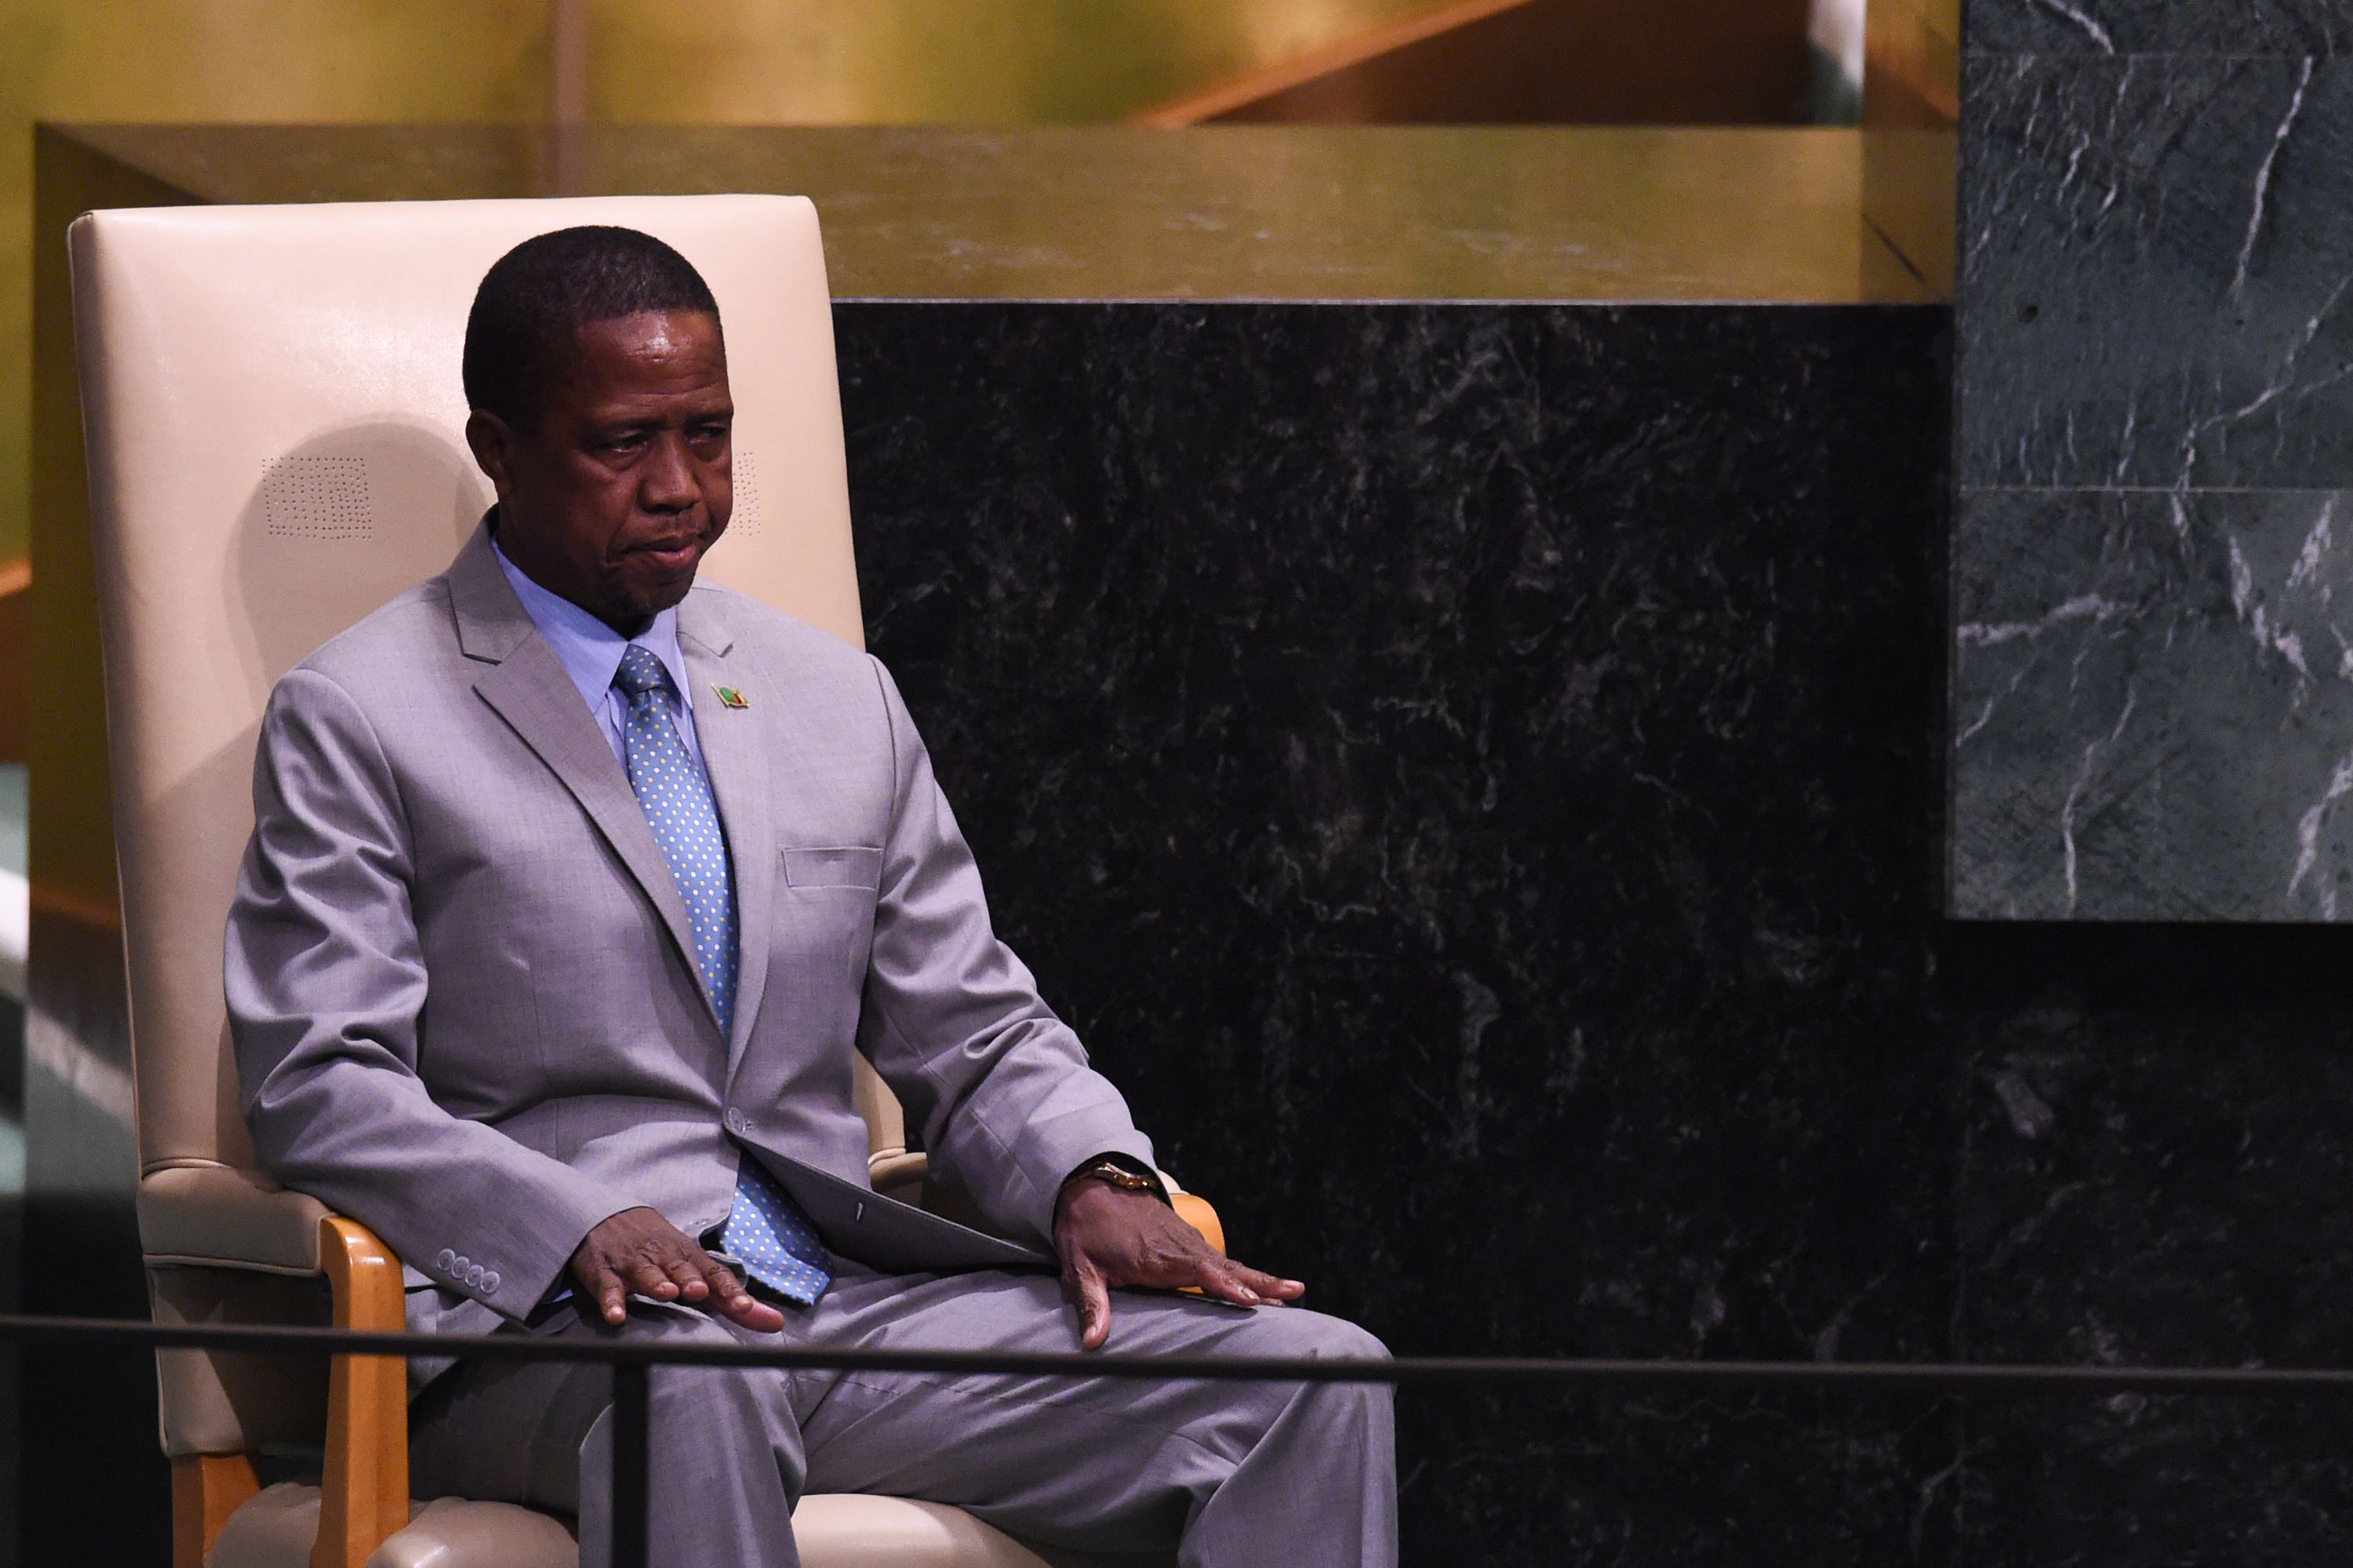 Zambian President Edgar Lungu waits to speak at the General Debate of the 73rd session of the General Assembly at the United Nations on Sept. 25, 2018 in New York. (Bryan R. Smith—AFP/Getty Images)